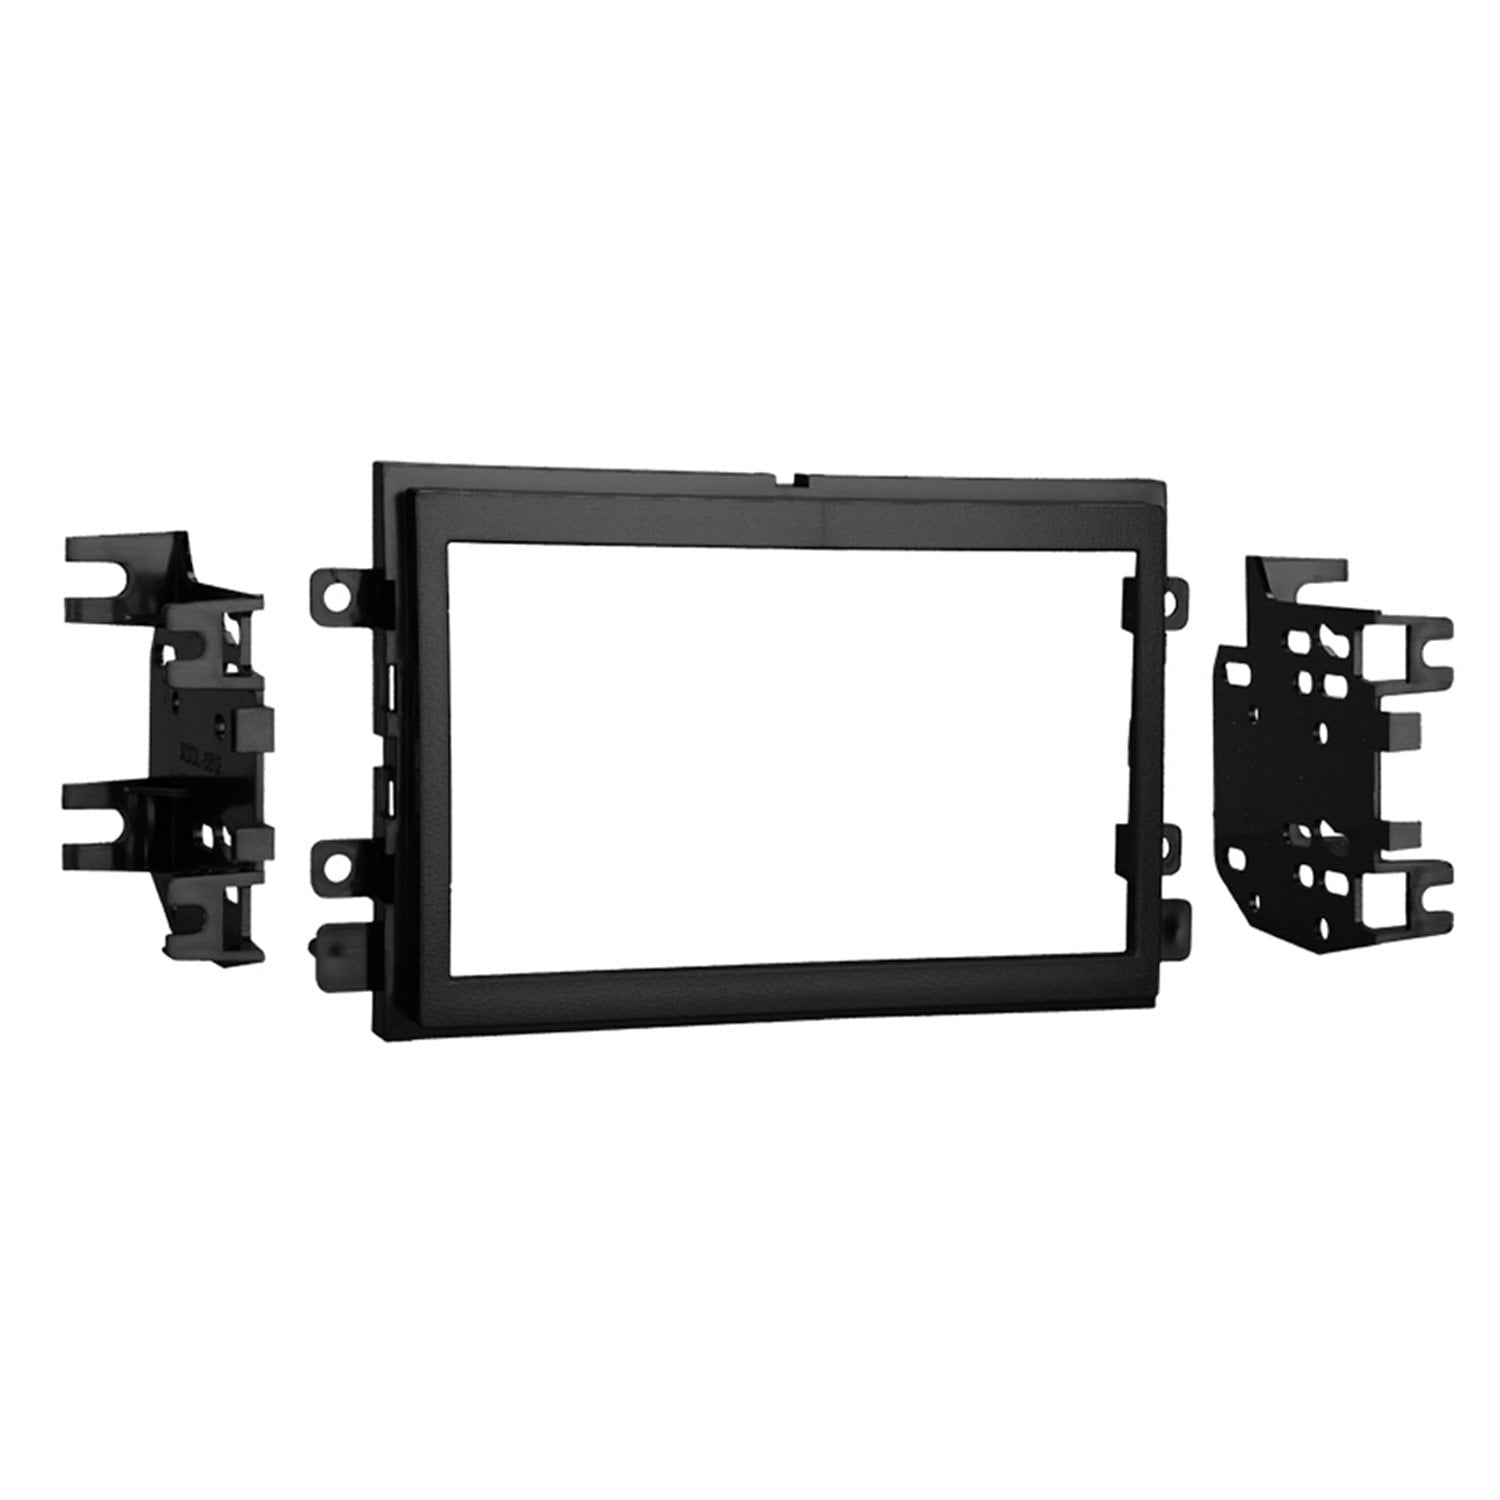 American International FMK540 Double DIN/Single ISO w/ Pocket for 2004-2016 Ford 